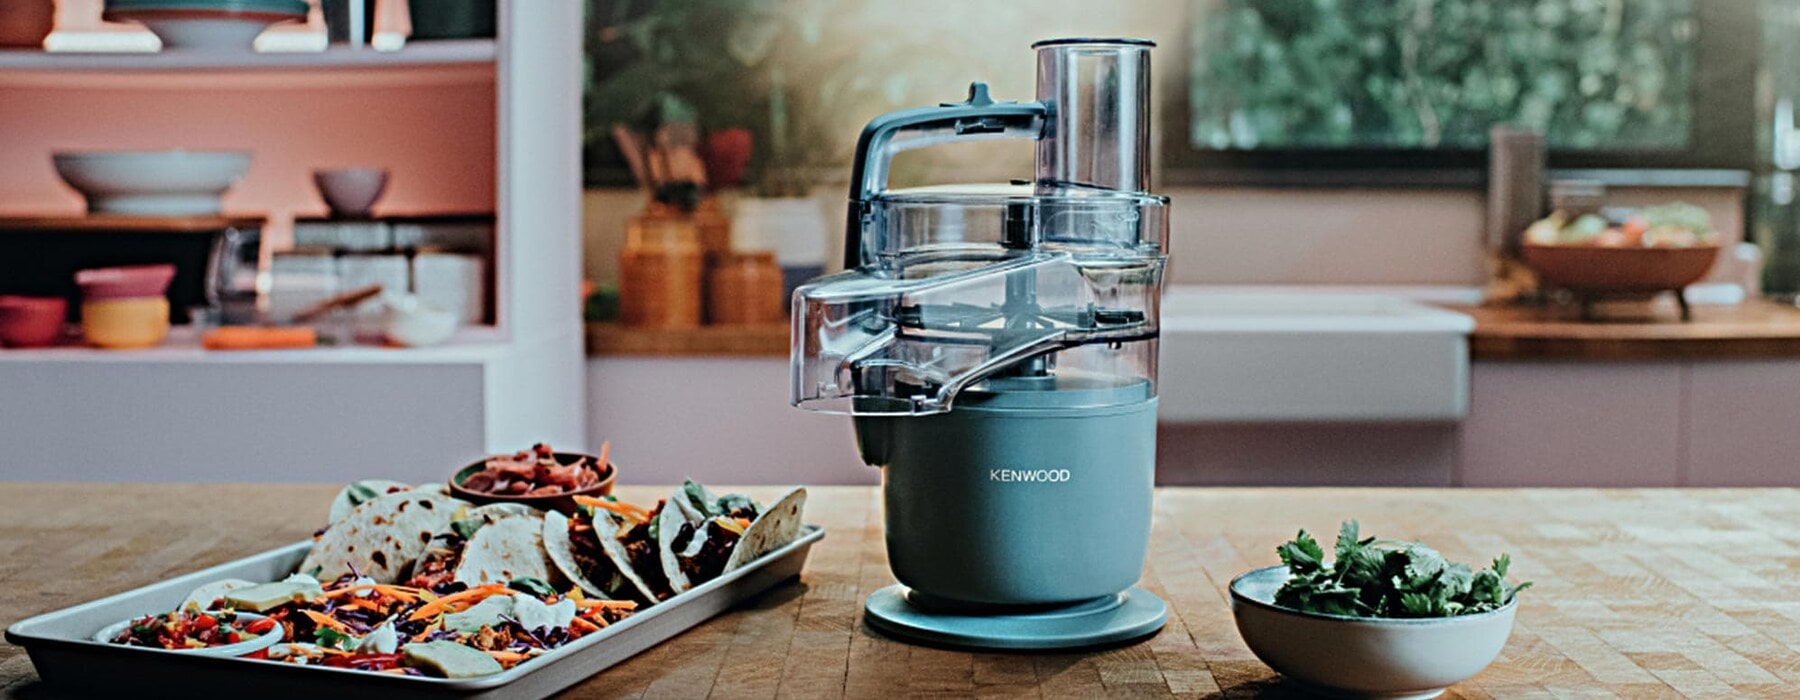 5 Reasons You Need The Kenwood MultiPro Compact - WOMAN